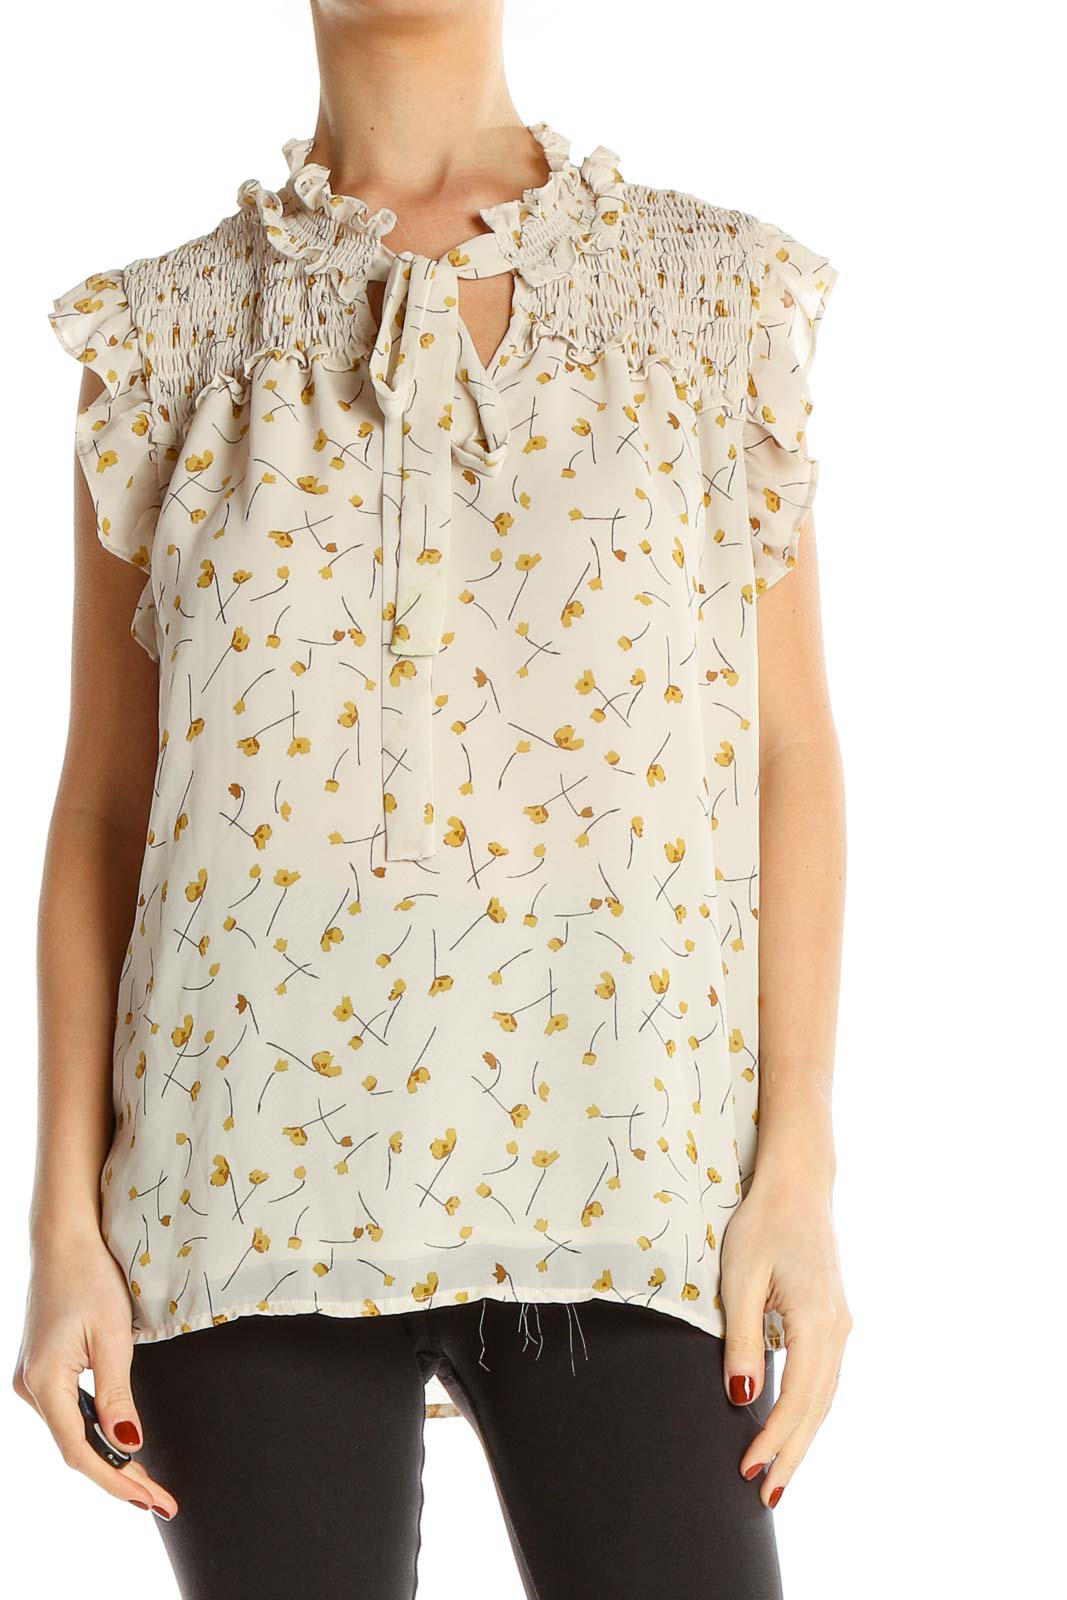 Beige Yellow Floral Print Bohemian Sleeveless Blouse Front